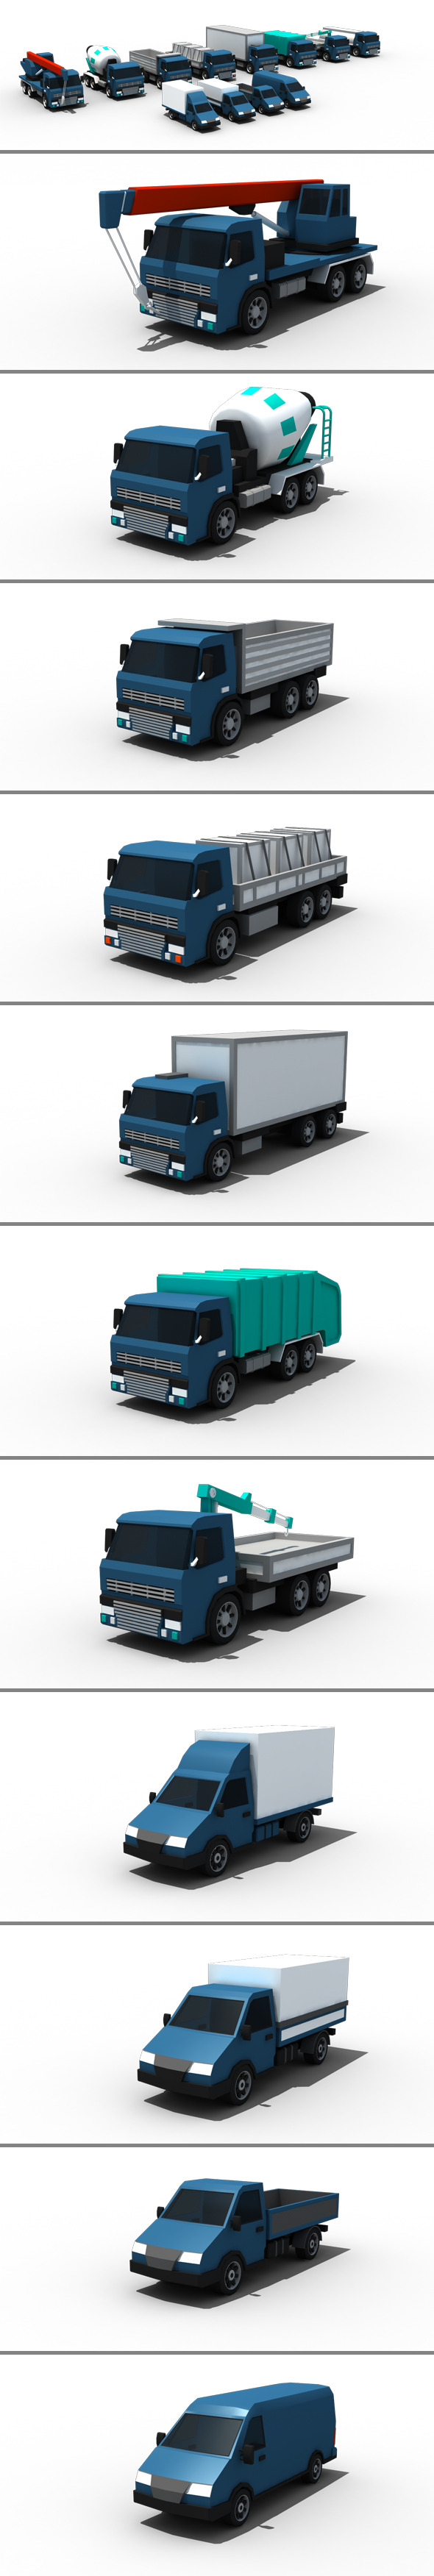 Low Poly Cars - 3Docean 11867234